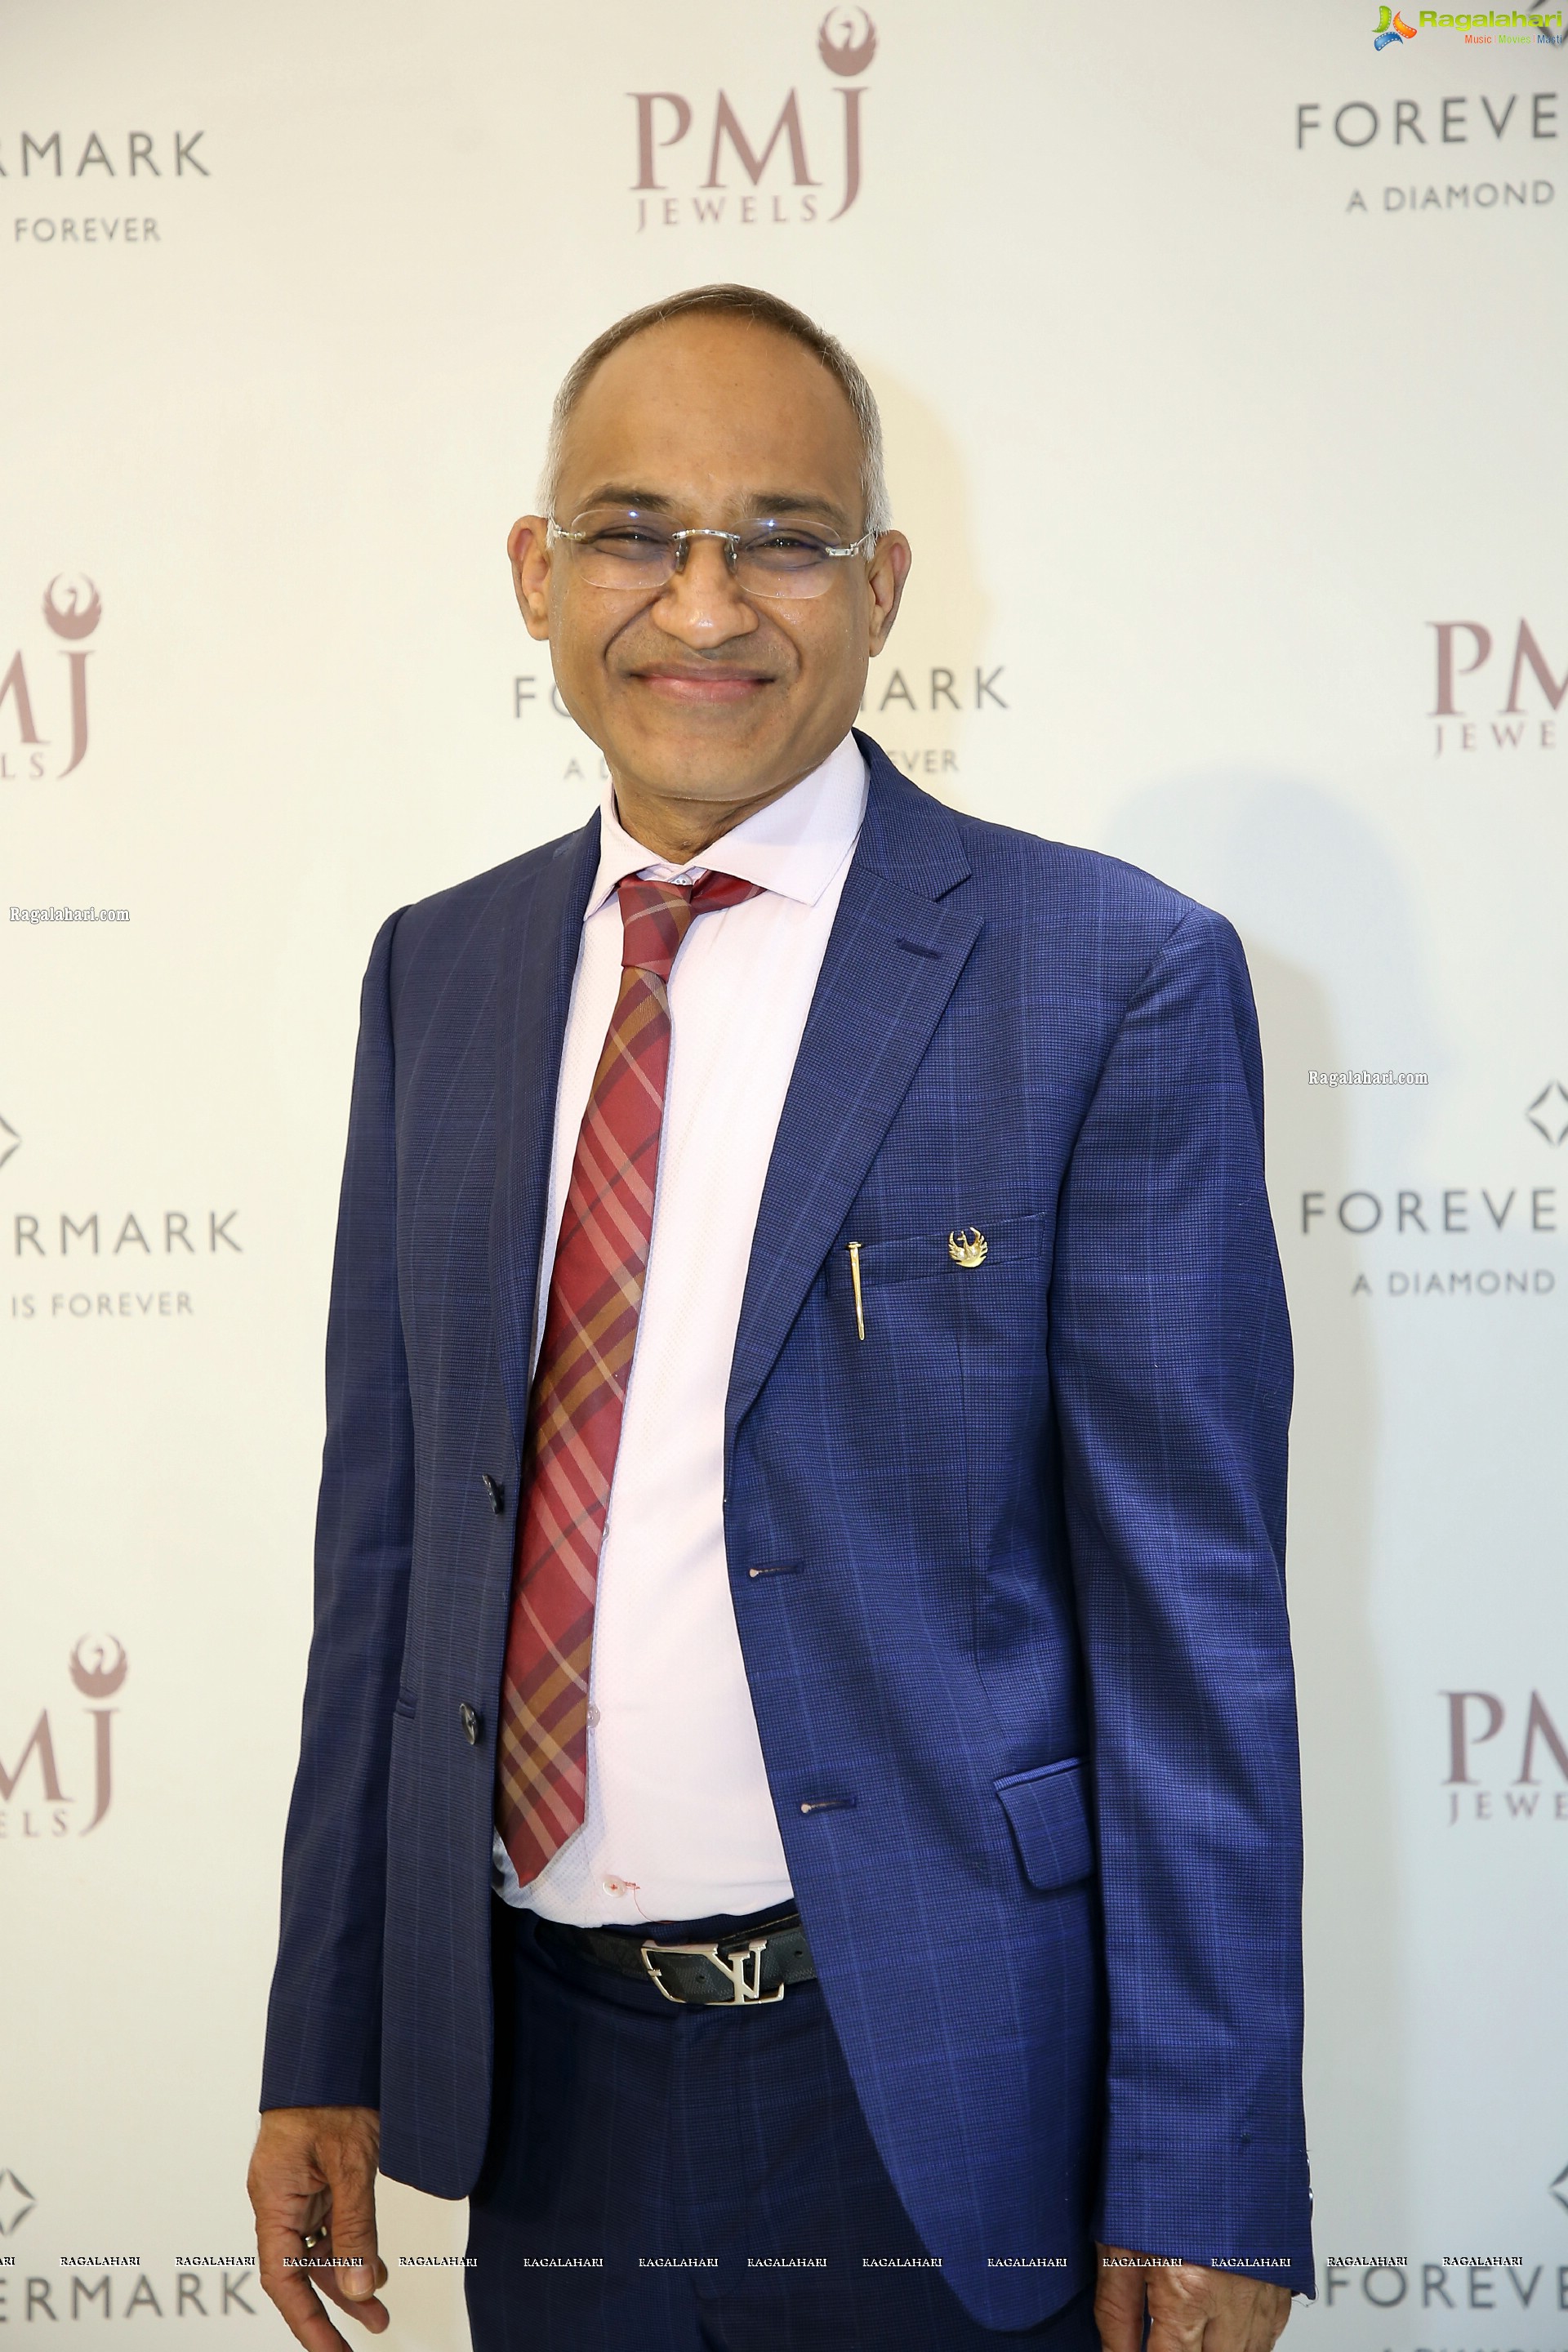 PMJ Jewels Launches The Exclusive Forevermark Circle of Trust Collection in Hyderabad